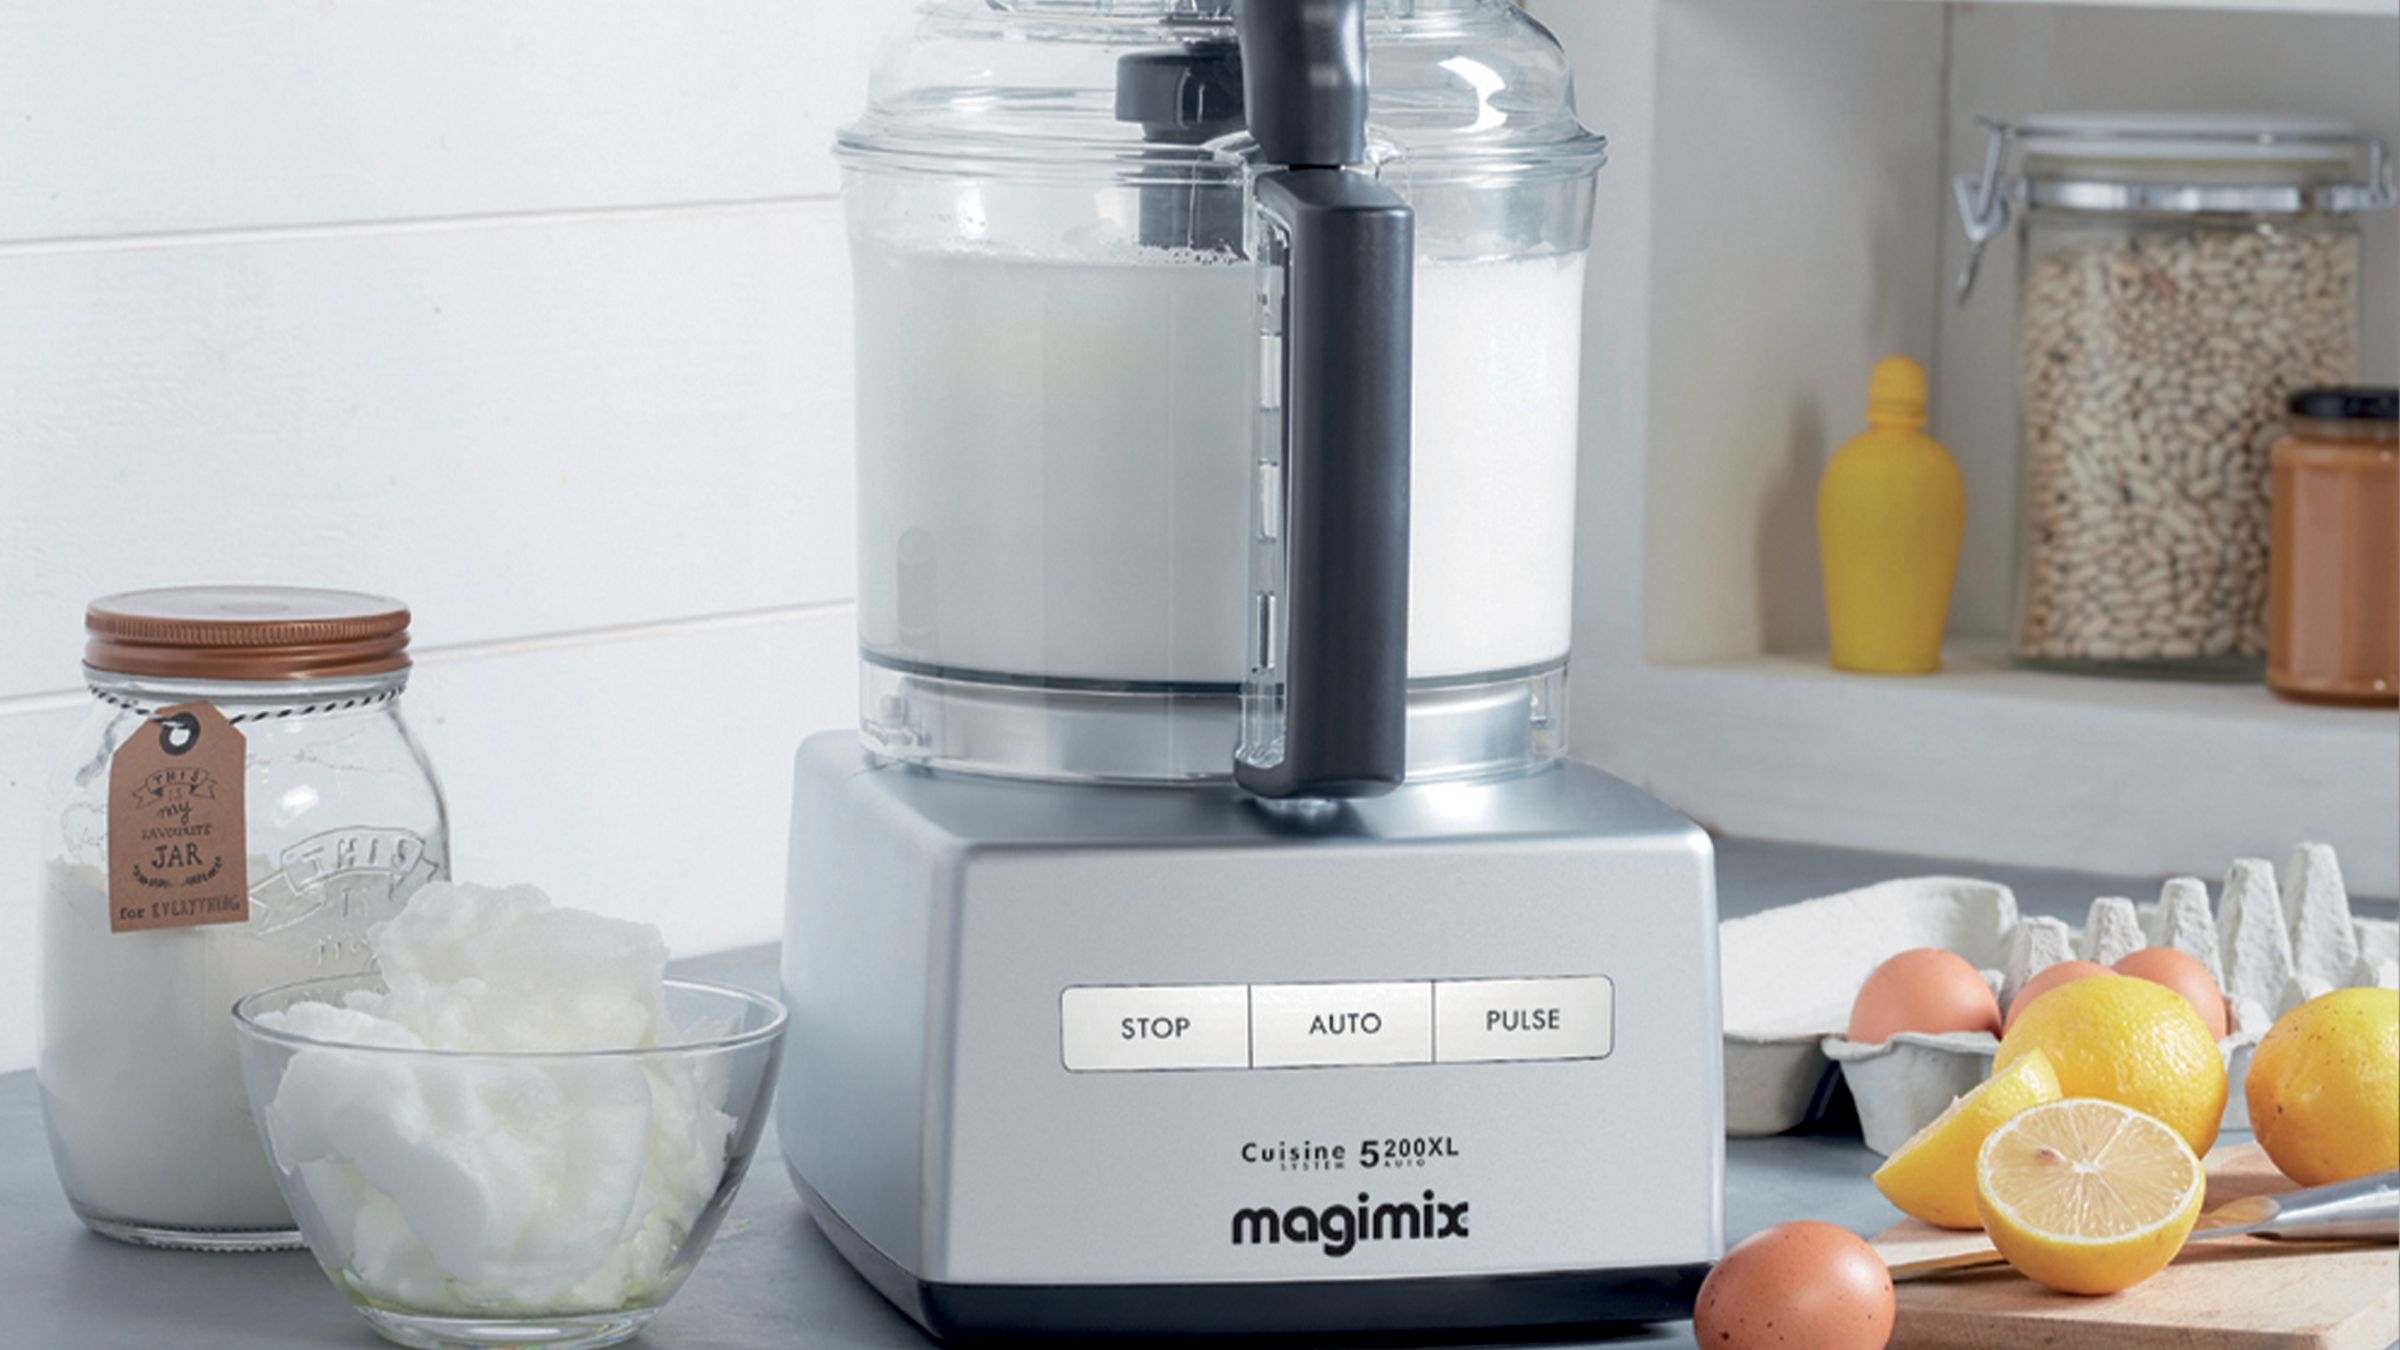 Magimix, inventor of the food processor